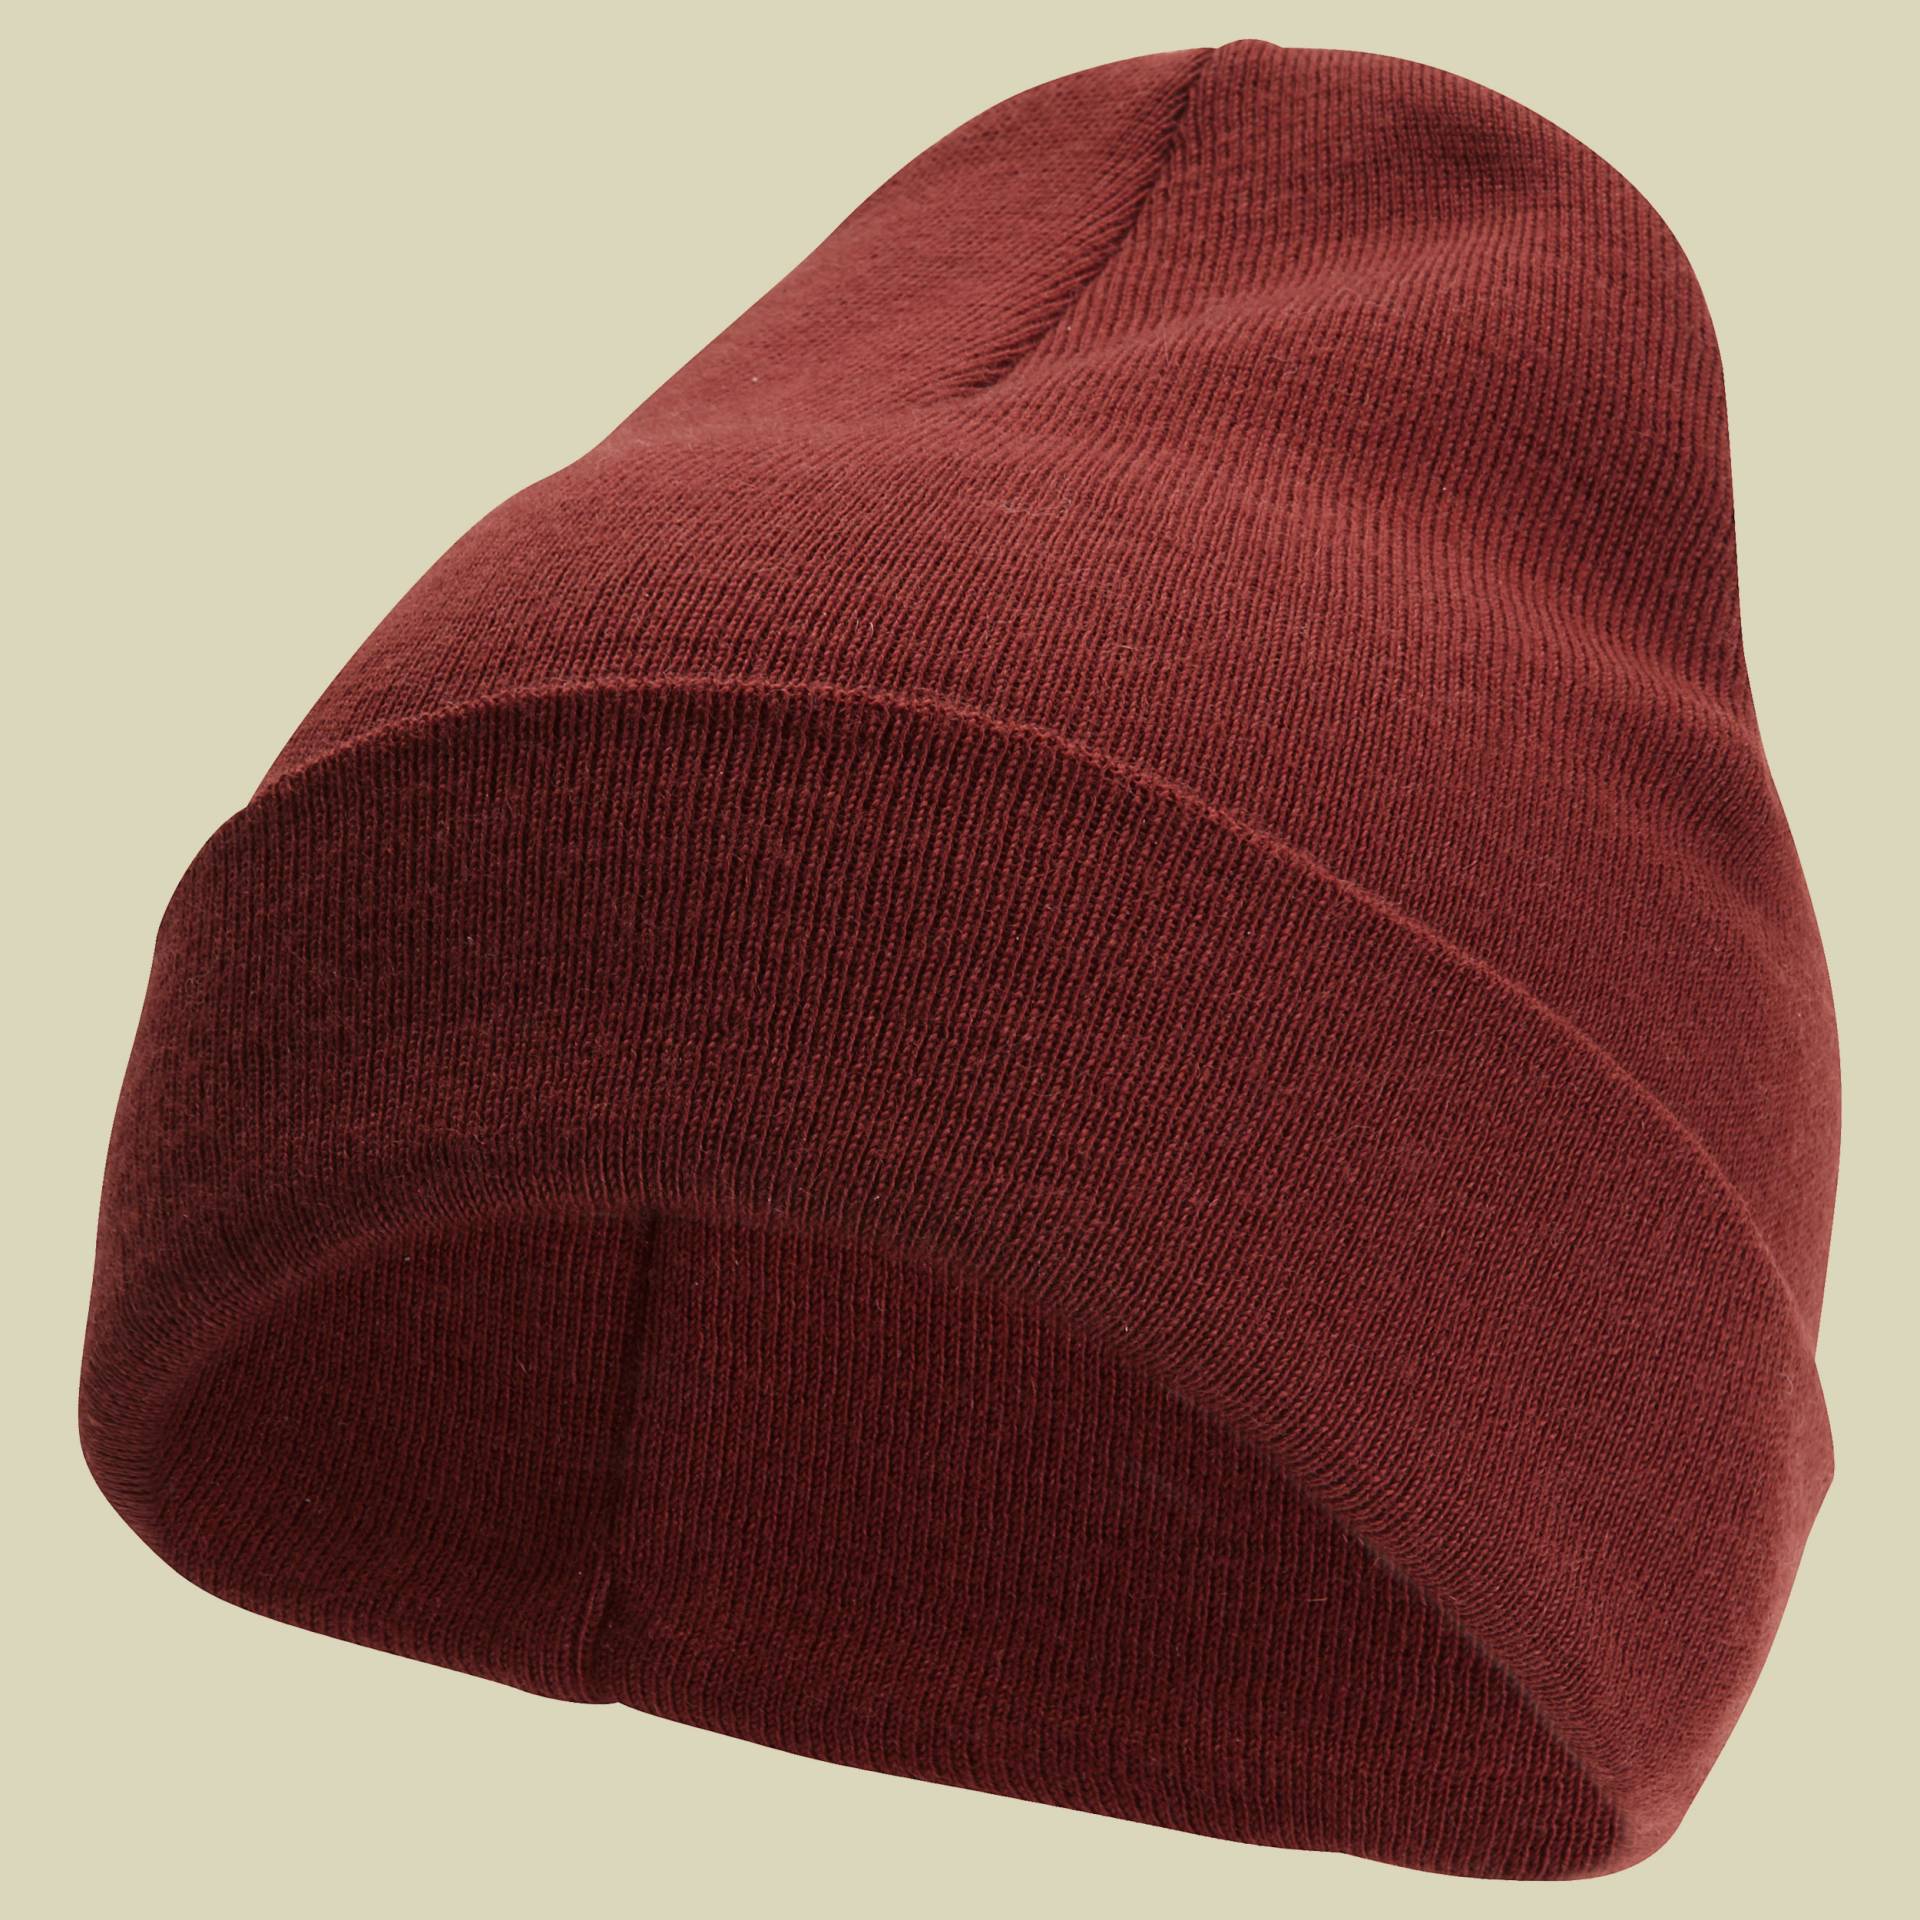 Beanie Classic one size rot - Farbe rust red von Woolpower